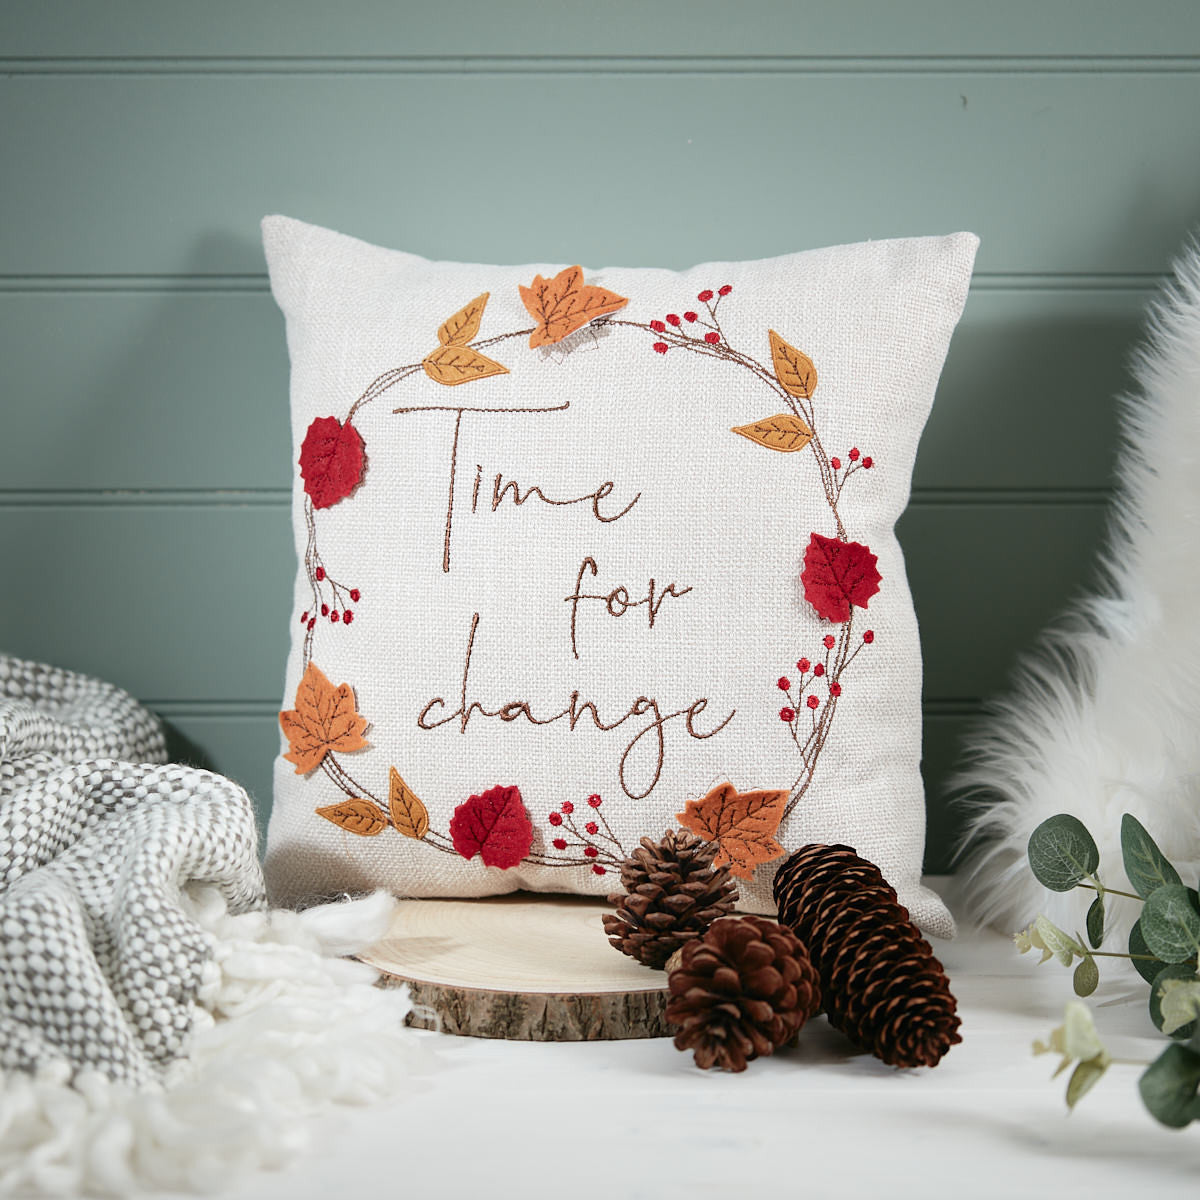 'Time for Change' cushion